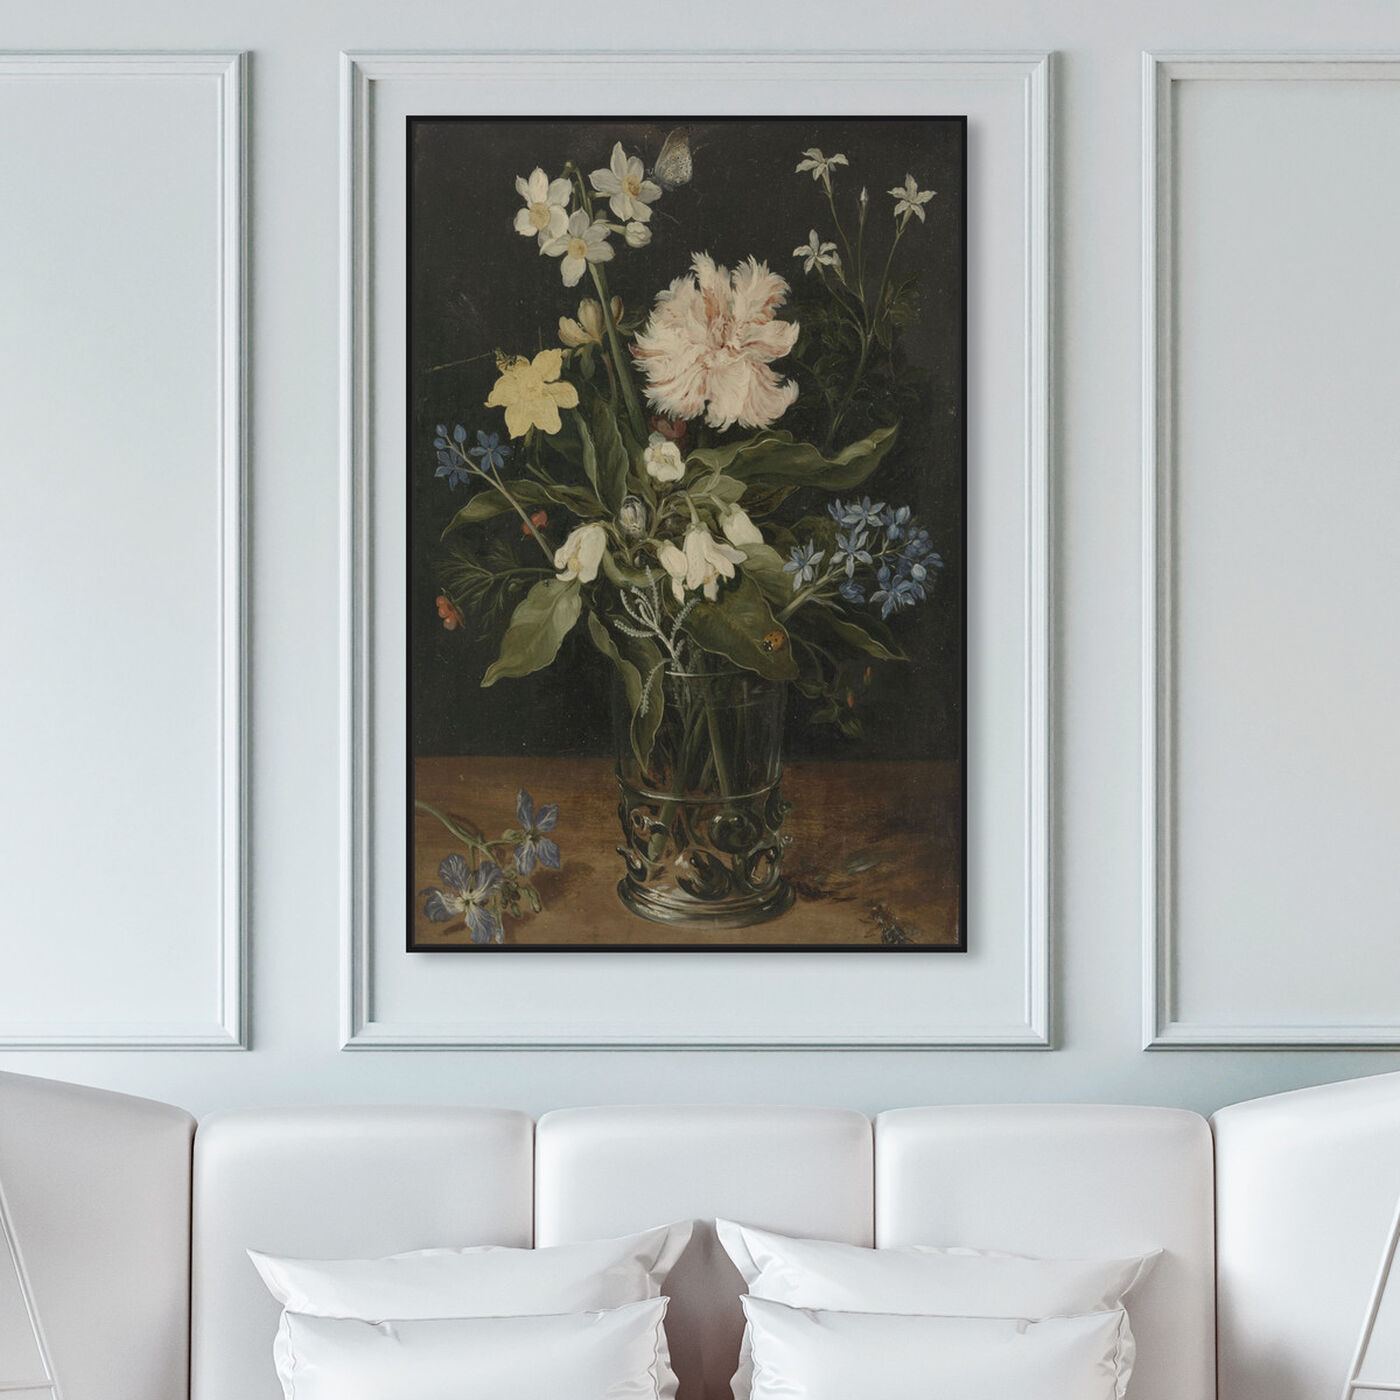 Hanging view of Flower Arrangement VI - The Art Cabinet featuring floral and botanical and florals art.